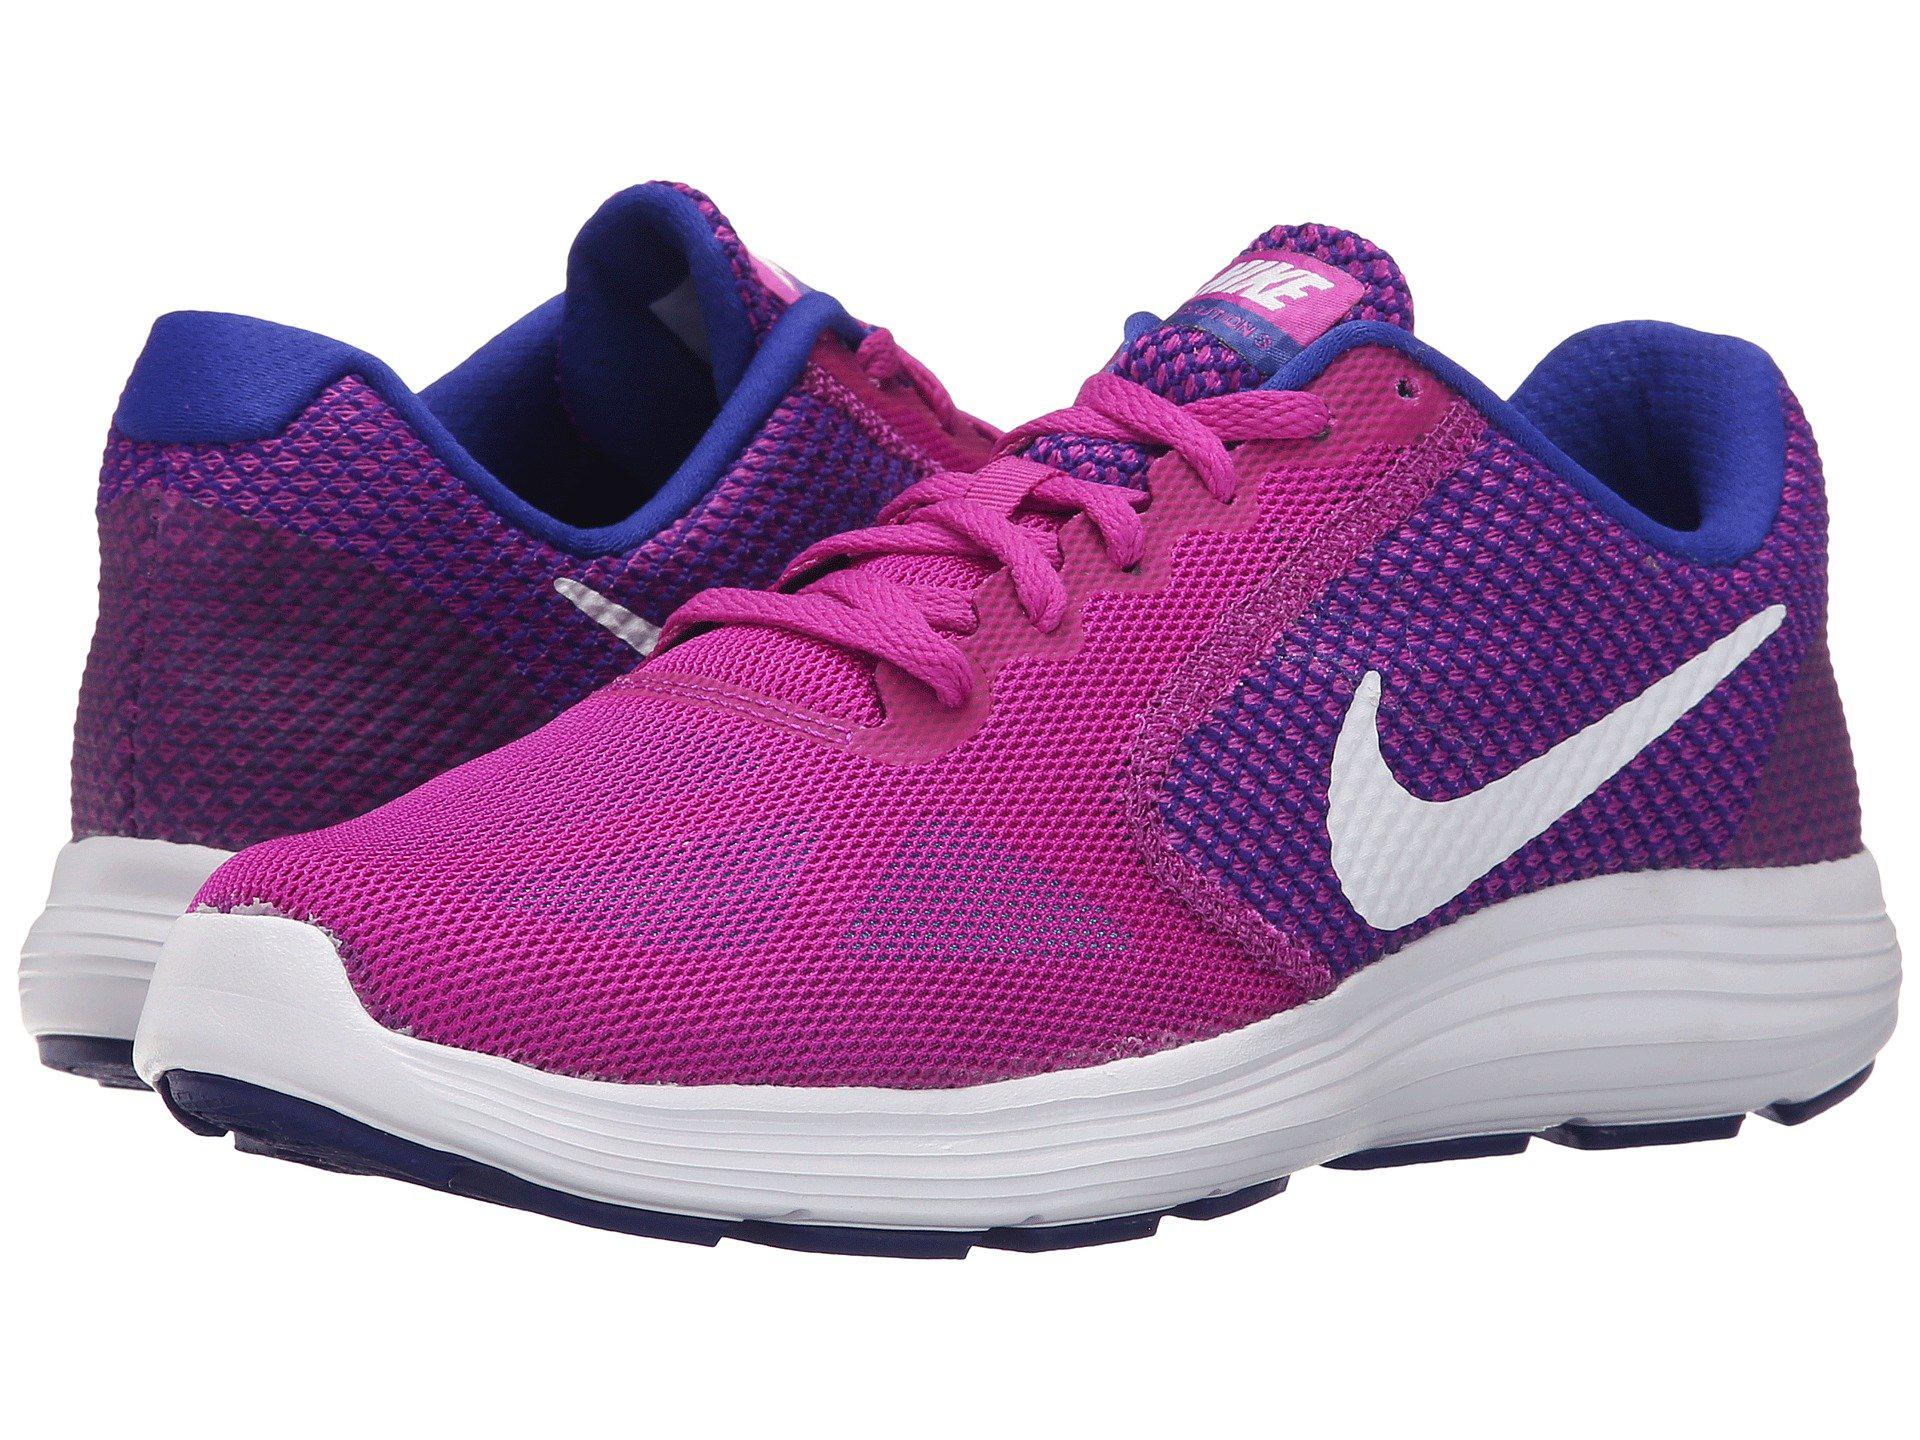 Nike Synthetic Revolution 3 (hyper Violet/concord/gamma Blue/white) Women's  Running Shoes - Lyst